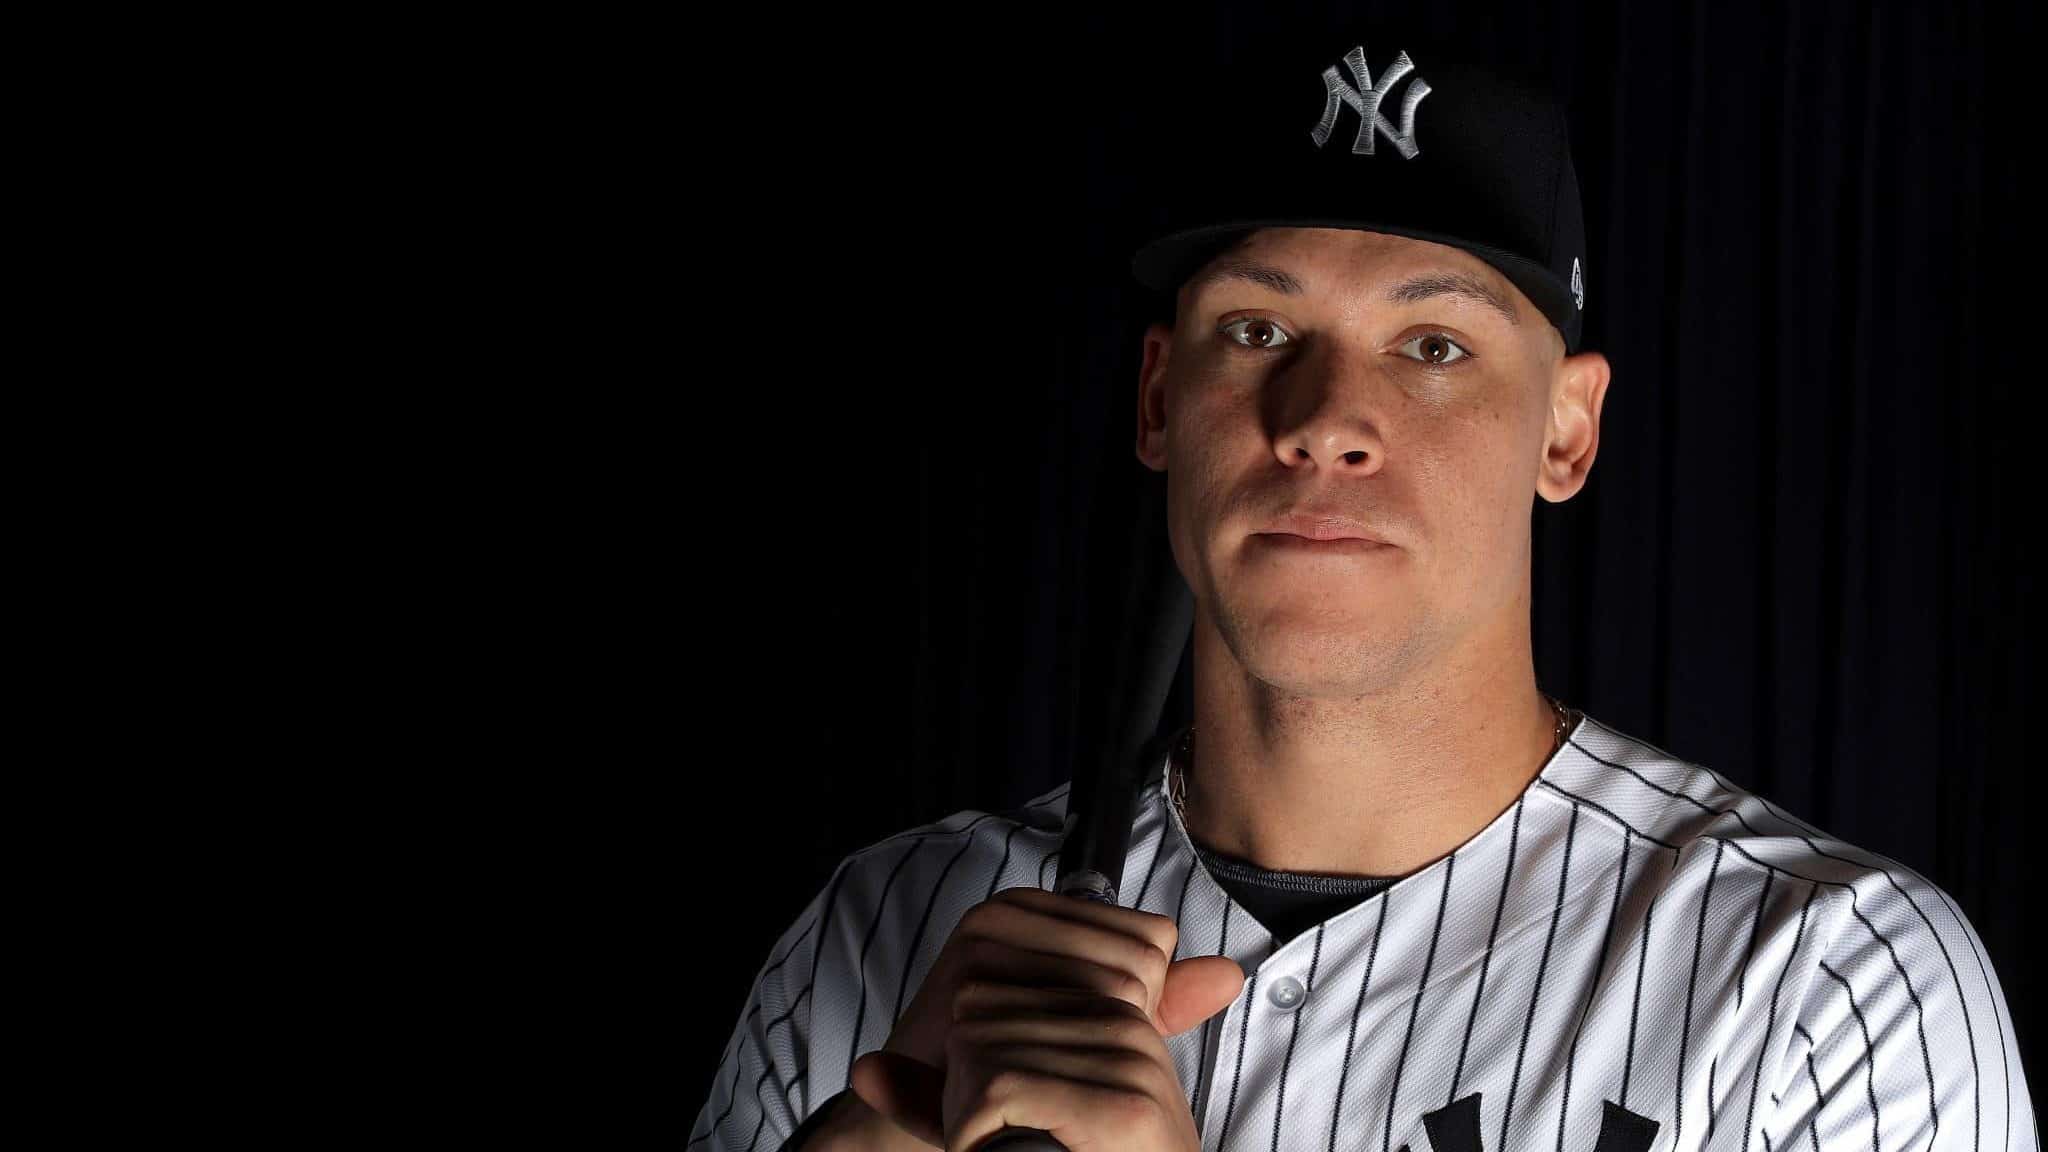 TAMPA, FLORIDA - FEBRUARY 20: Aaron Judge #99 of the New York Yankees poses for a portrait during photo day on February 20, 2020 in Tampa, Florida.